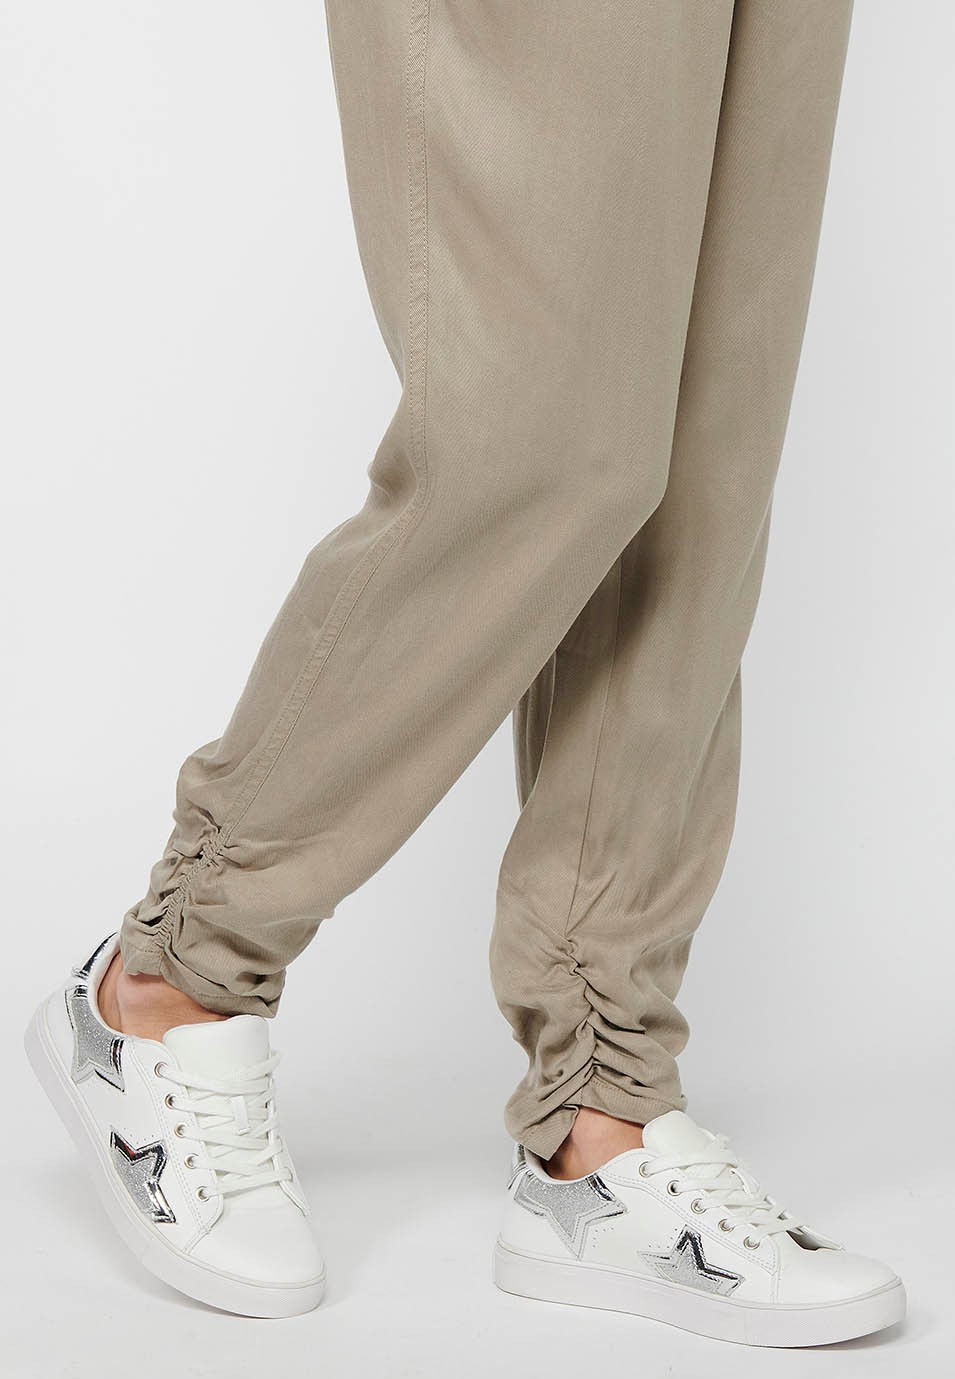 Long jogger pants with curled finish and rubberized waist with four pockets, two rear pockets with flap in Gray for Women 7